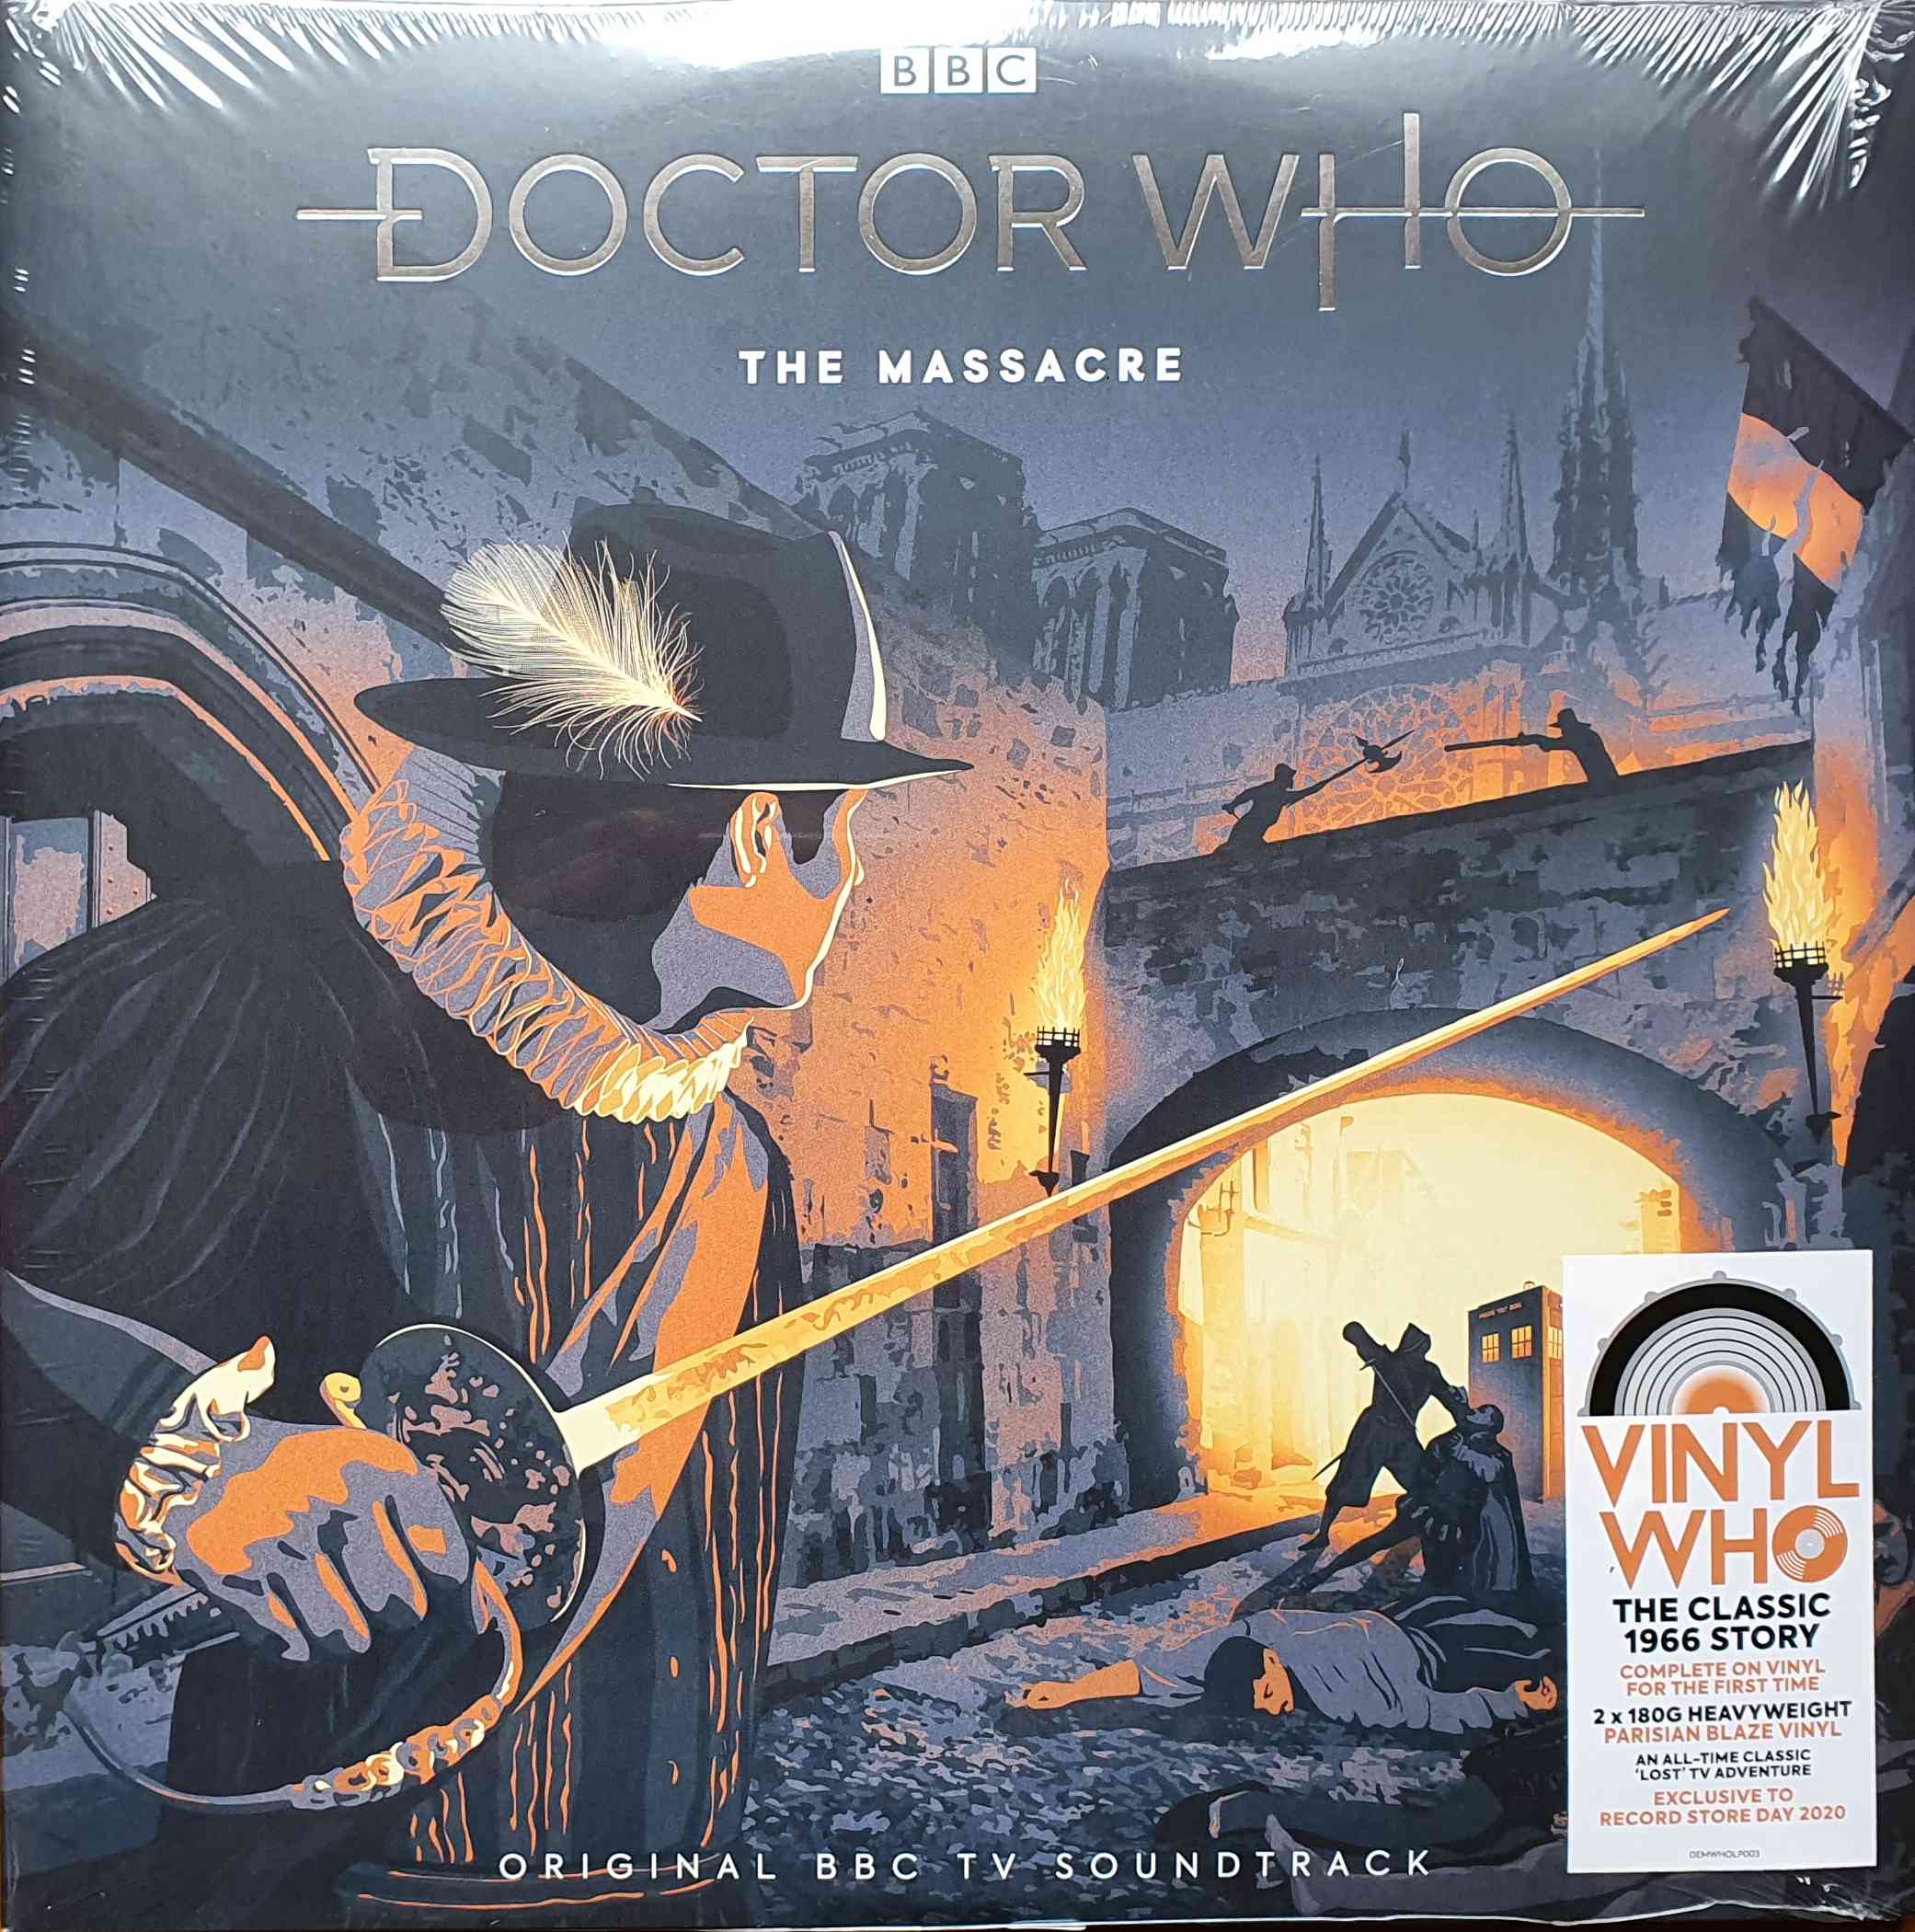 Picture of DEMWHOLP003 Doctor Who - The massacre - Record Store Day 2022 by artist John Lucarotti from the BBC records and Tapes library